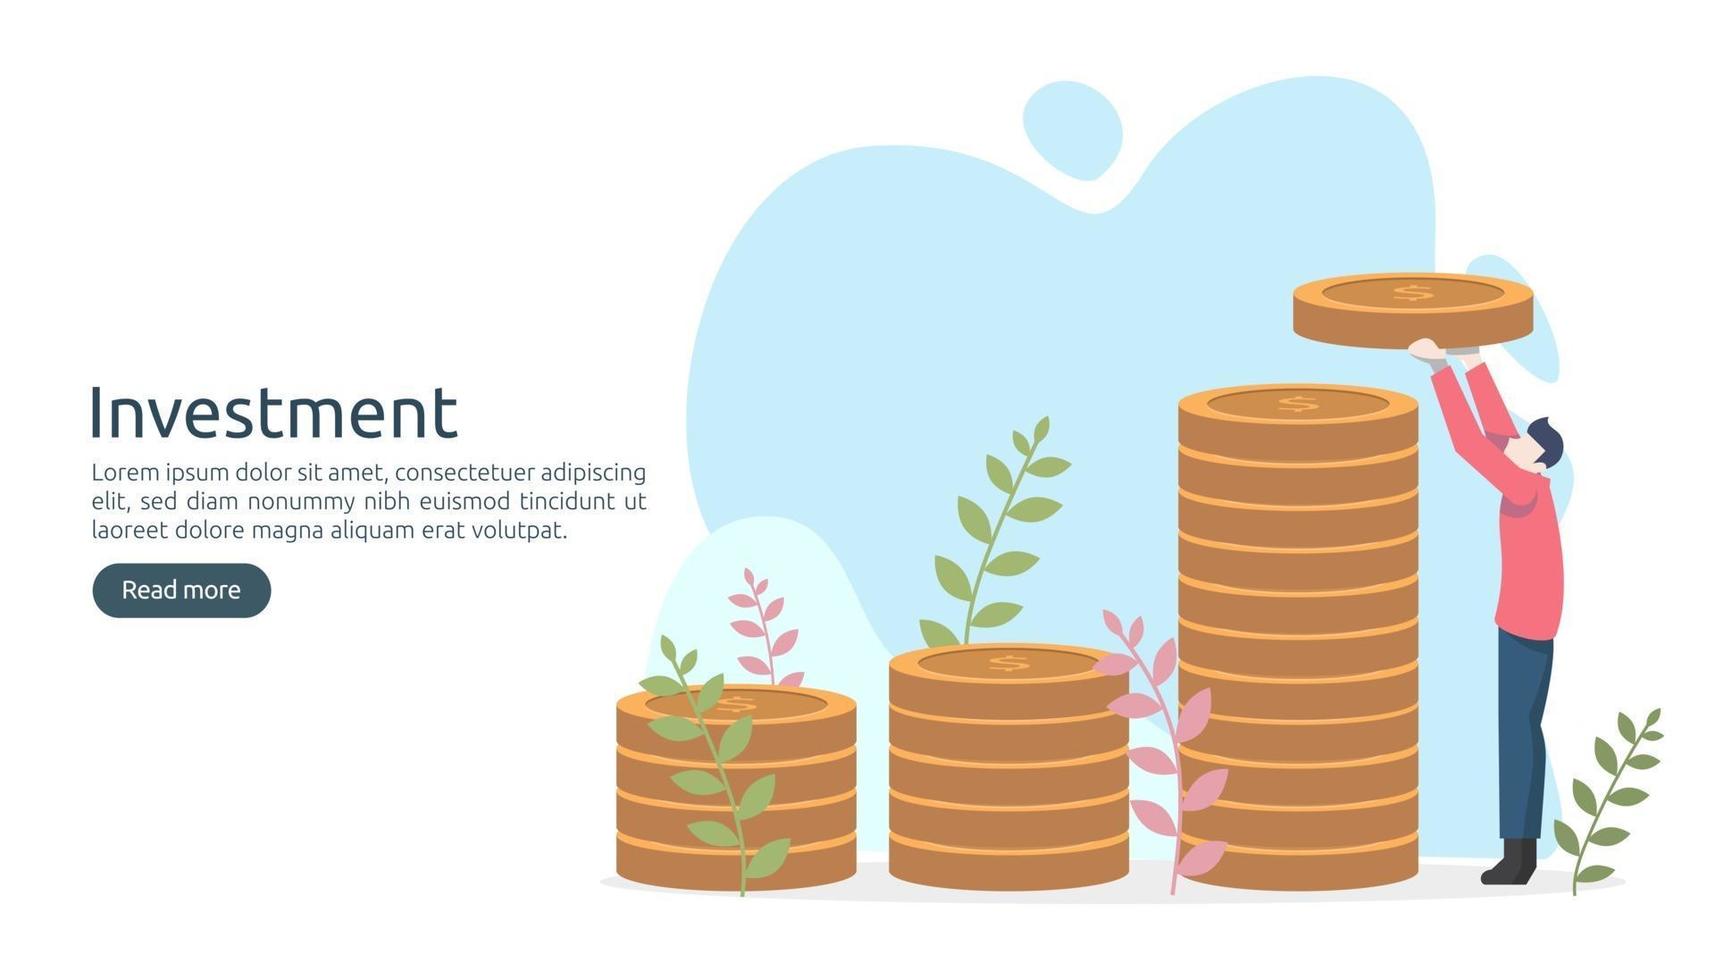 Business investment concept. dollar pile coin, tiny people, money object. graphic chart increase. Financial growth rising up to success. modern flat design landing page template vector illustration